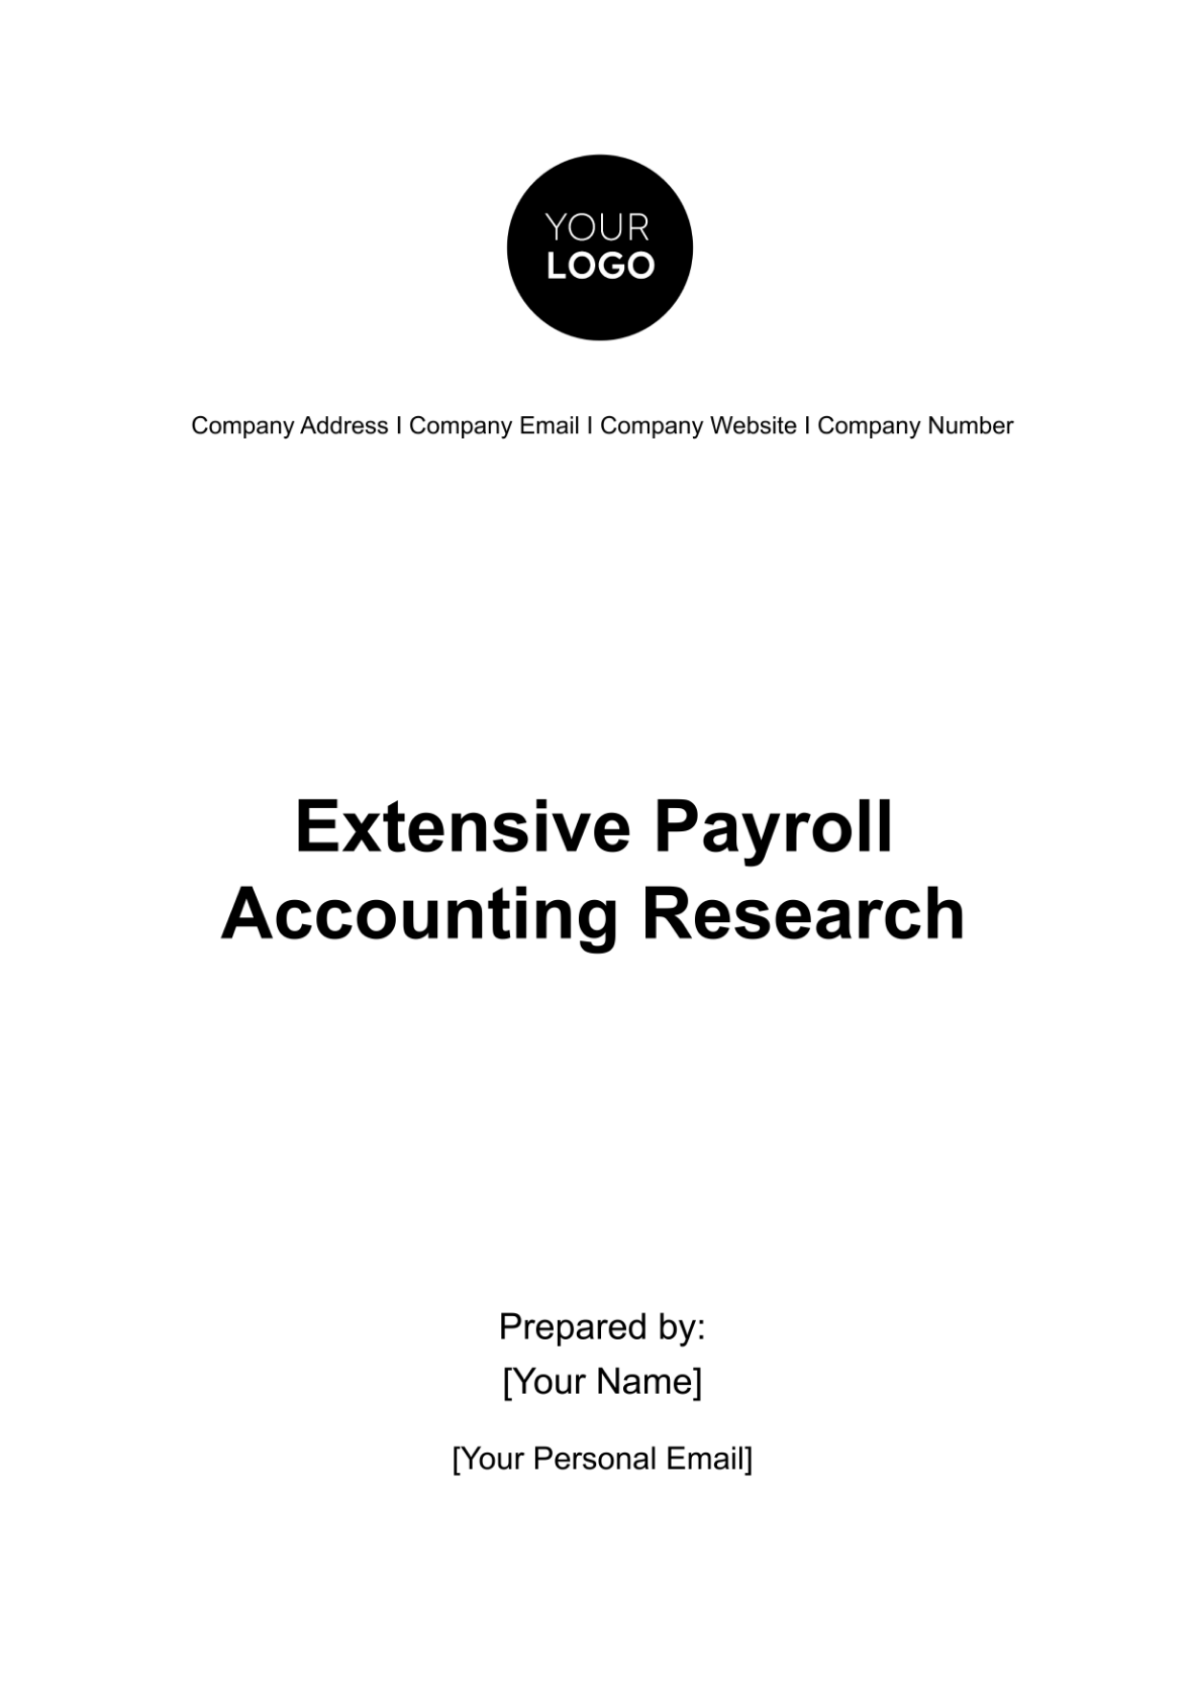 Extensive Payroll Accounting Research Template